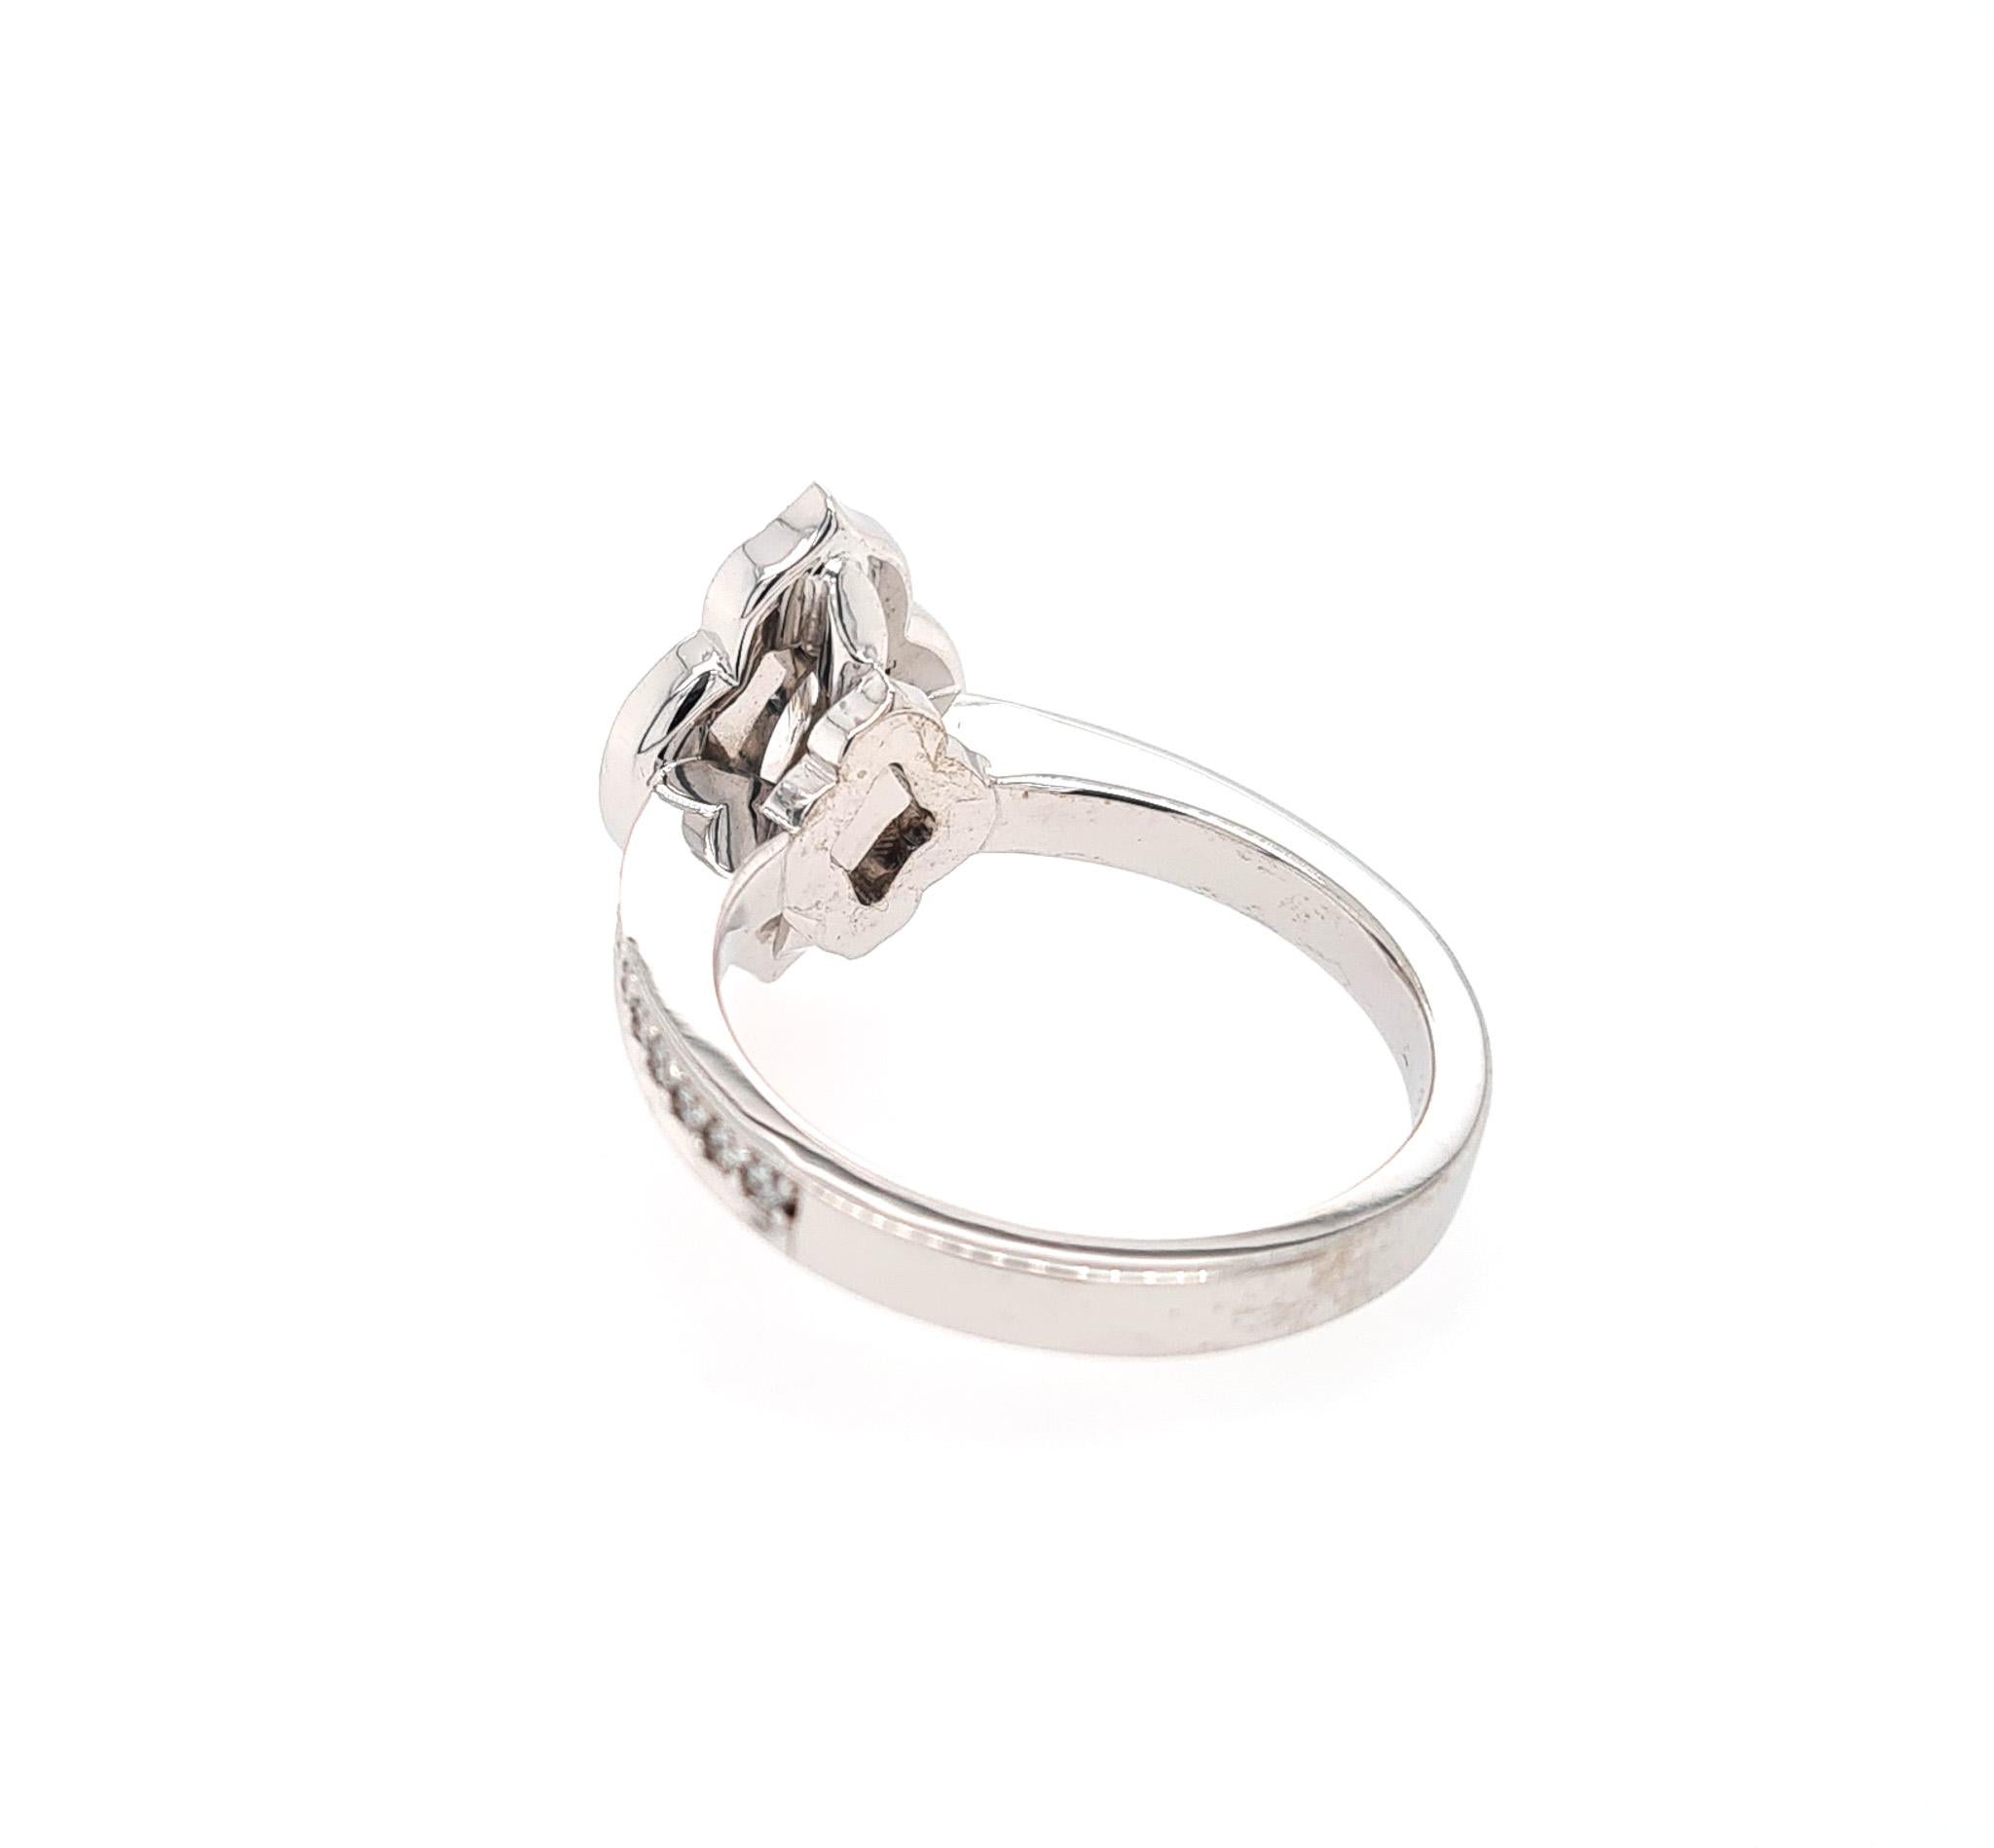 18ct White Gold and Diamond Engagement Ring 